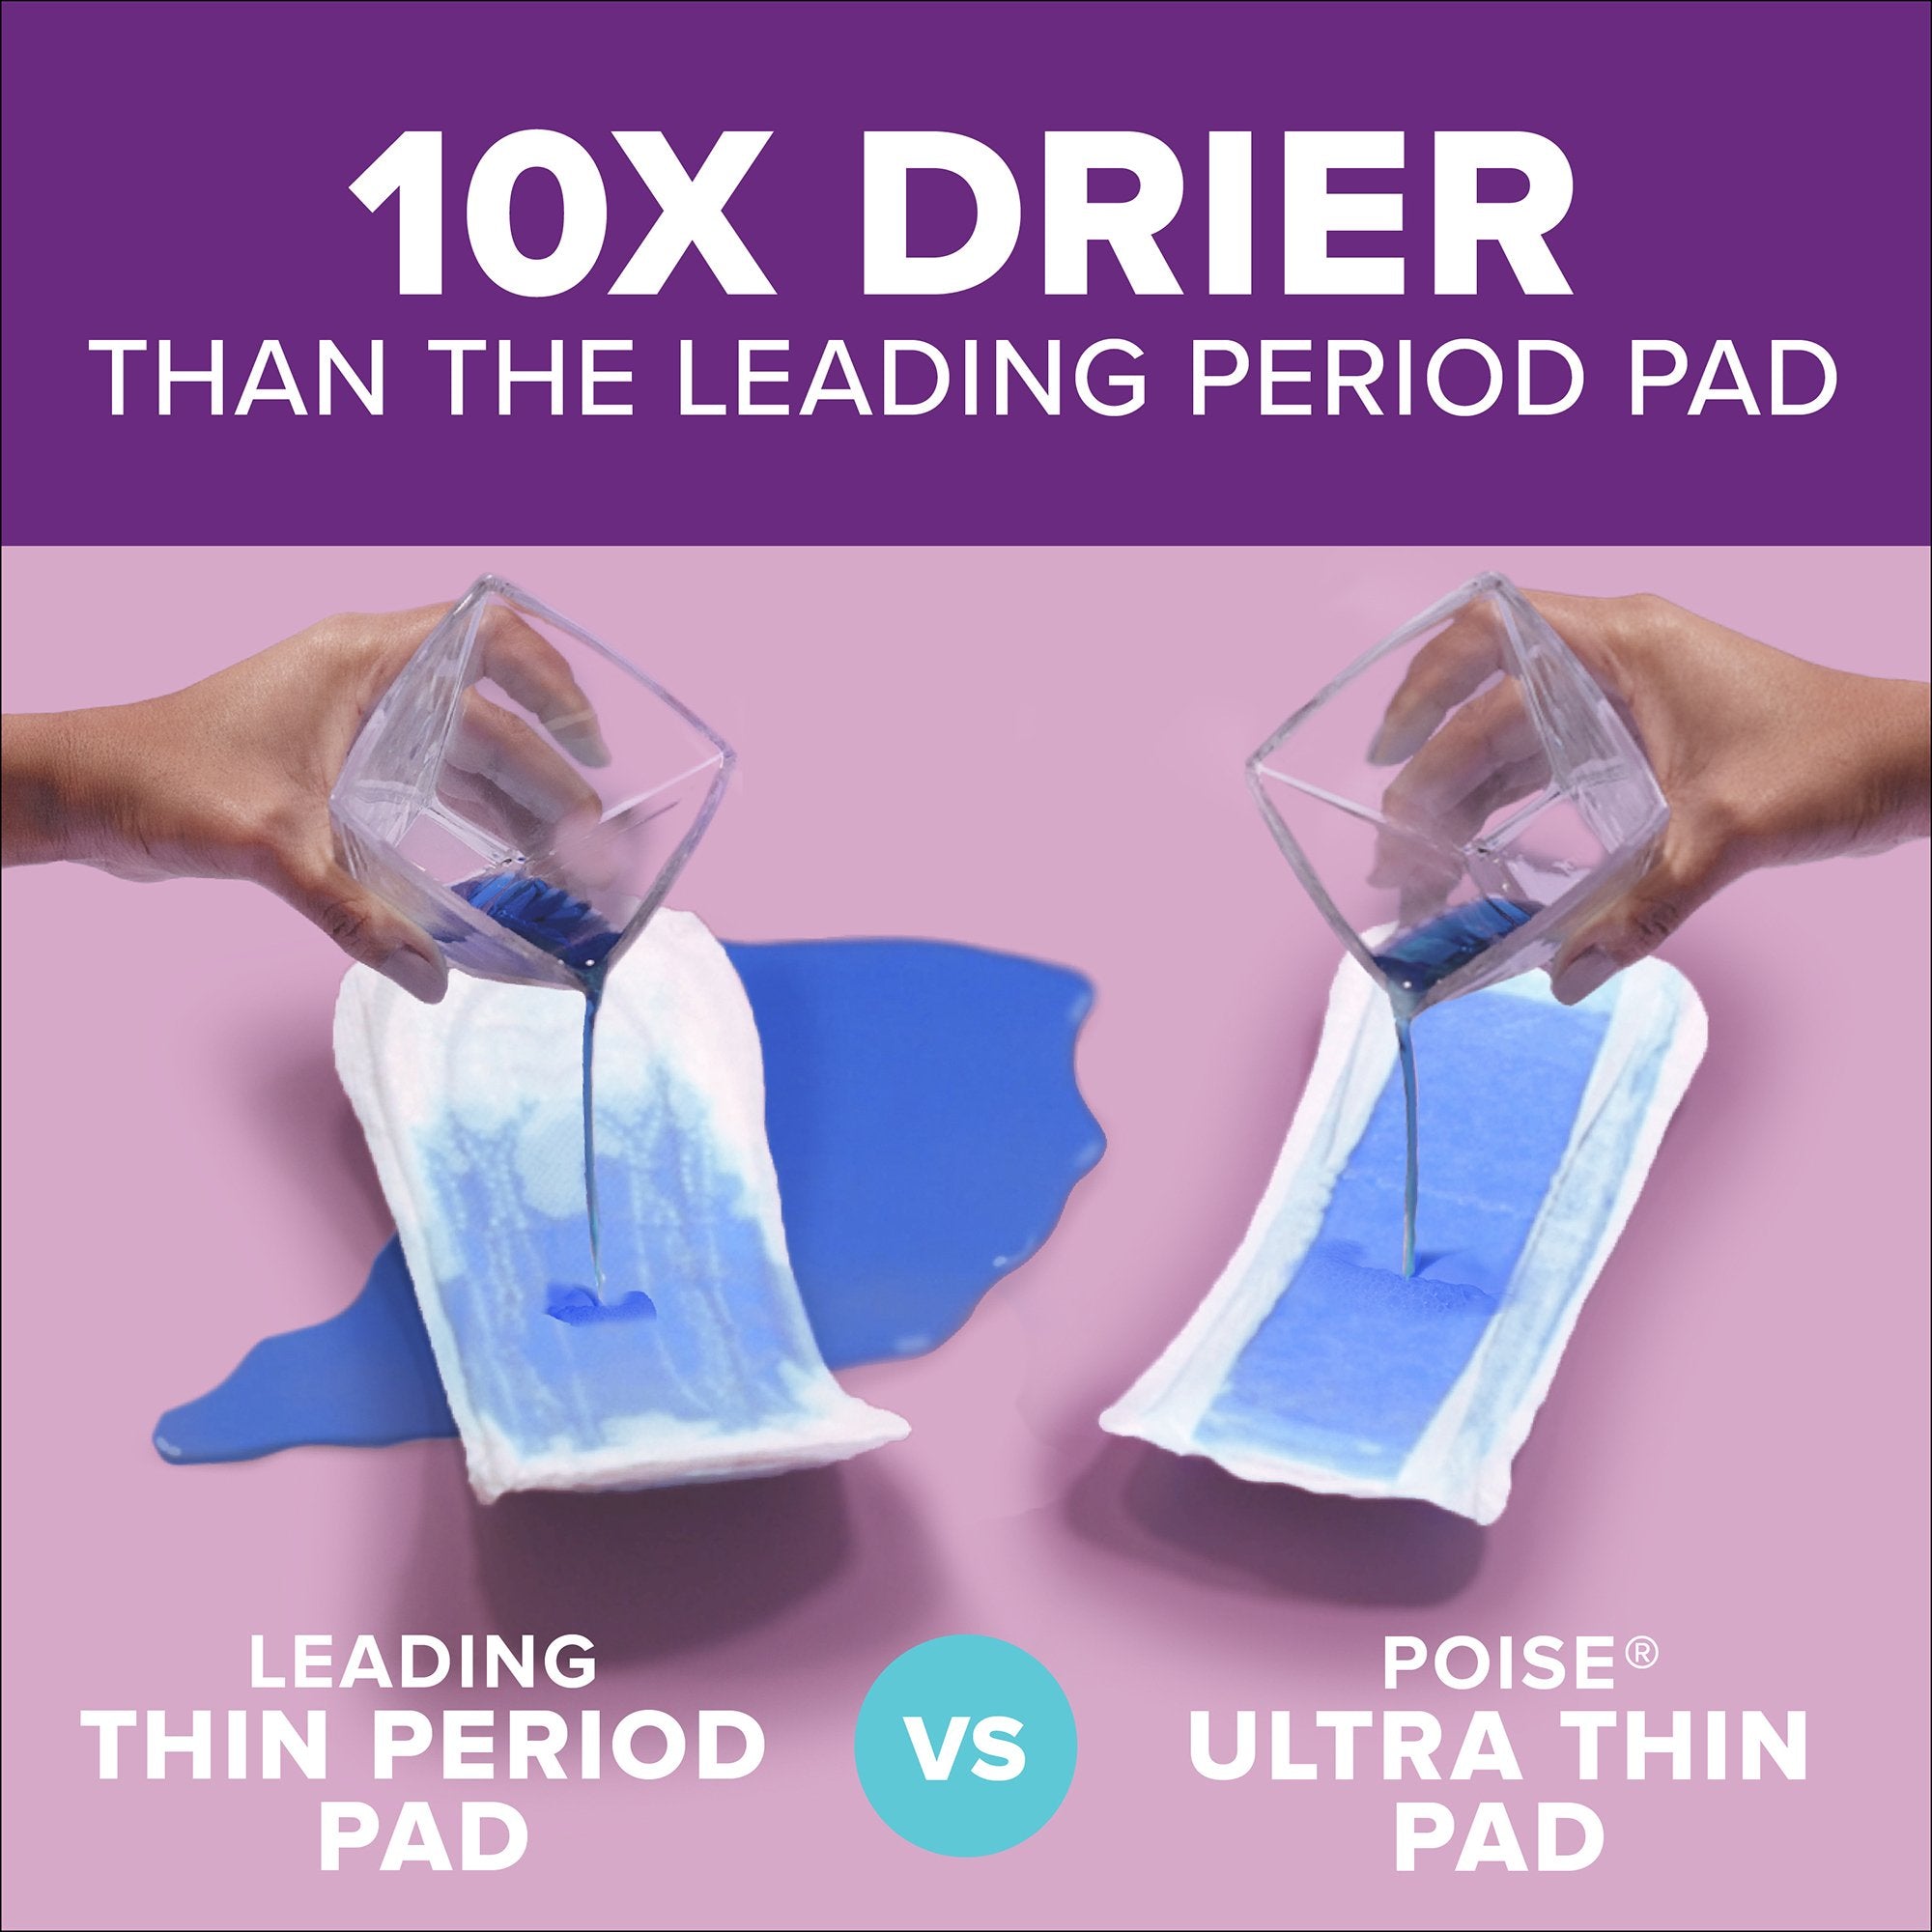 Bladder Control Pad Poise Ultra Thin Maximum 14.1 Inch Length Heavy Absorbency Sodium Polyacrylate Core One Size Fits Most